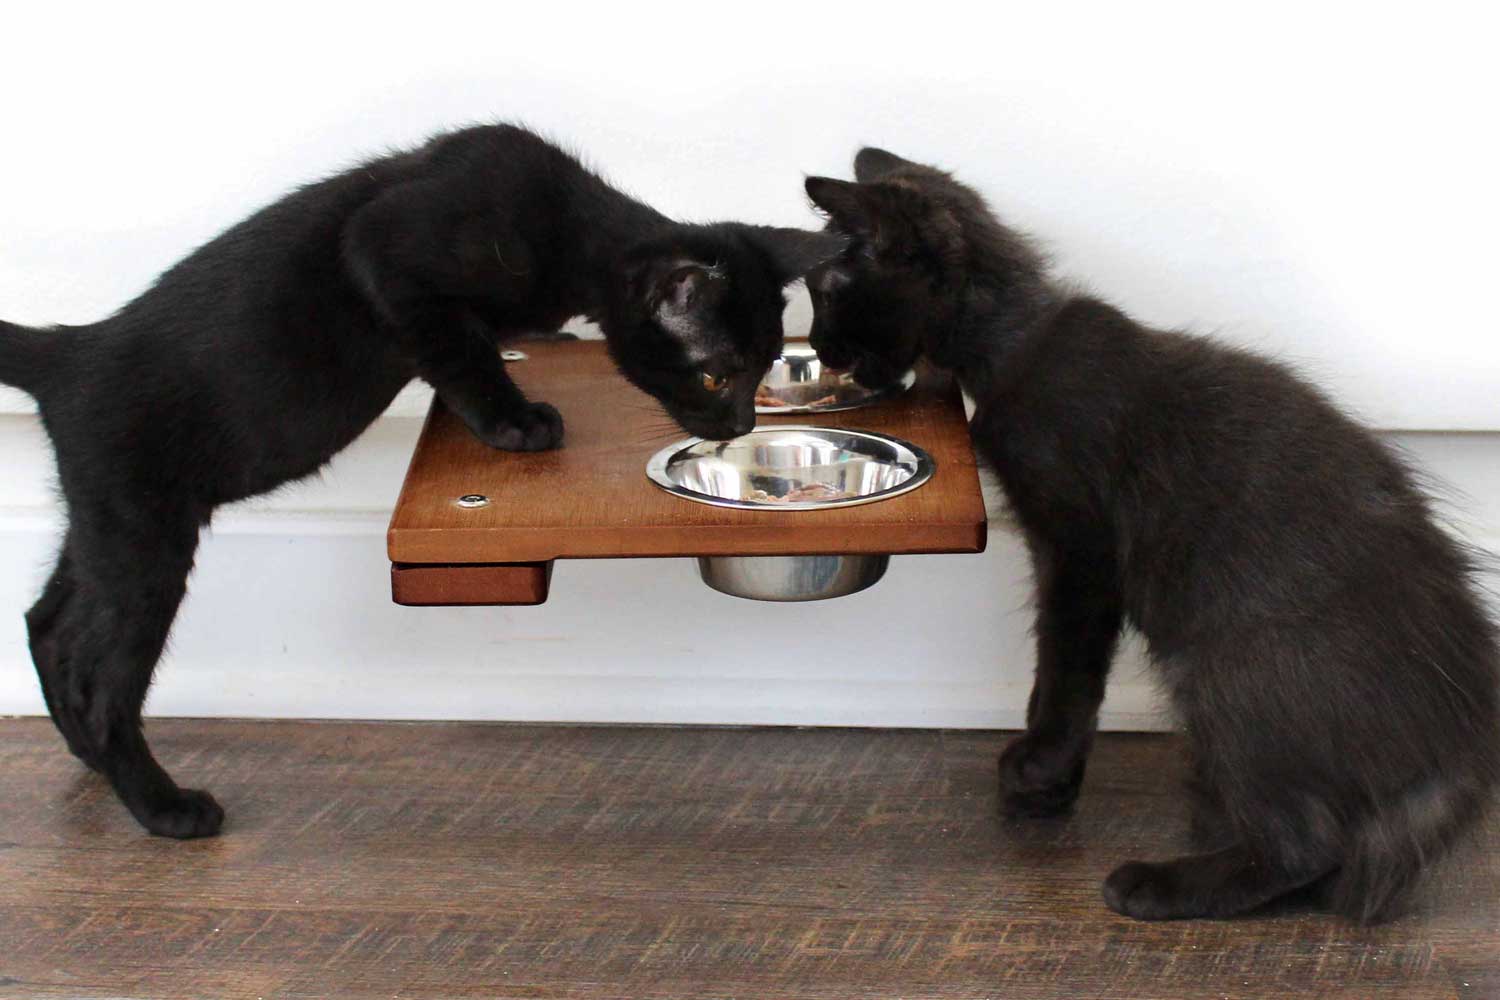 Two kittens eating from the English Chestnut 9-Inch Feeding Shelf